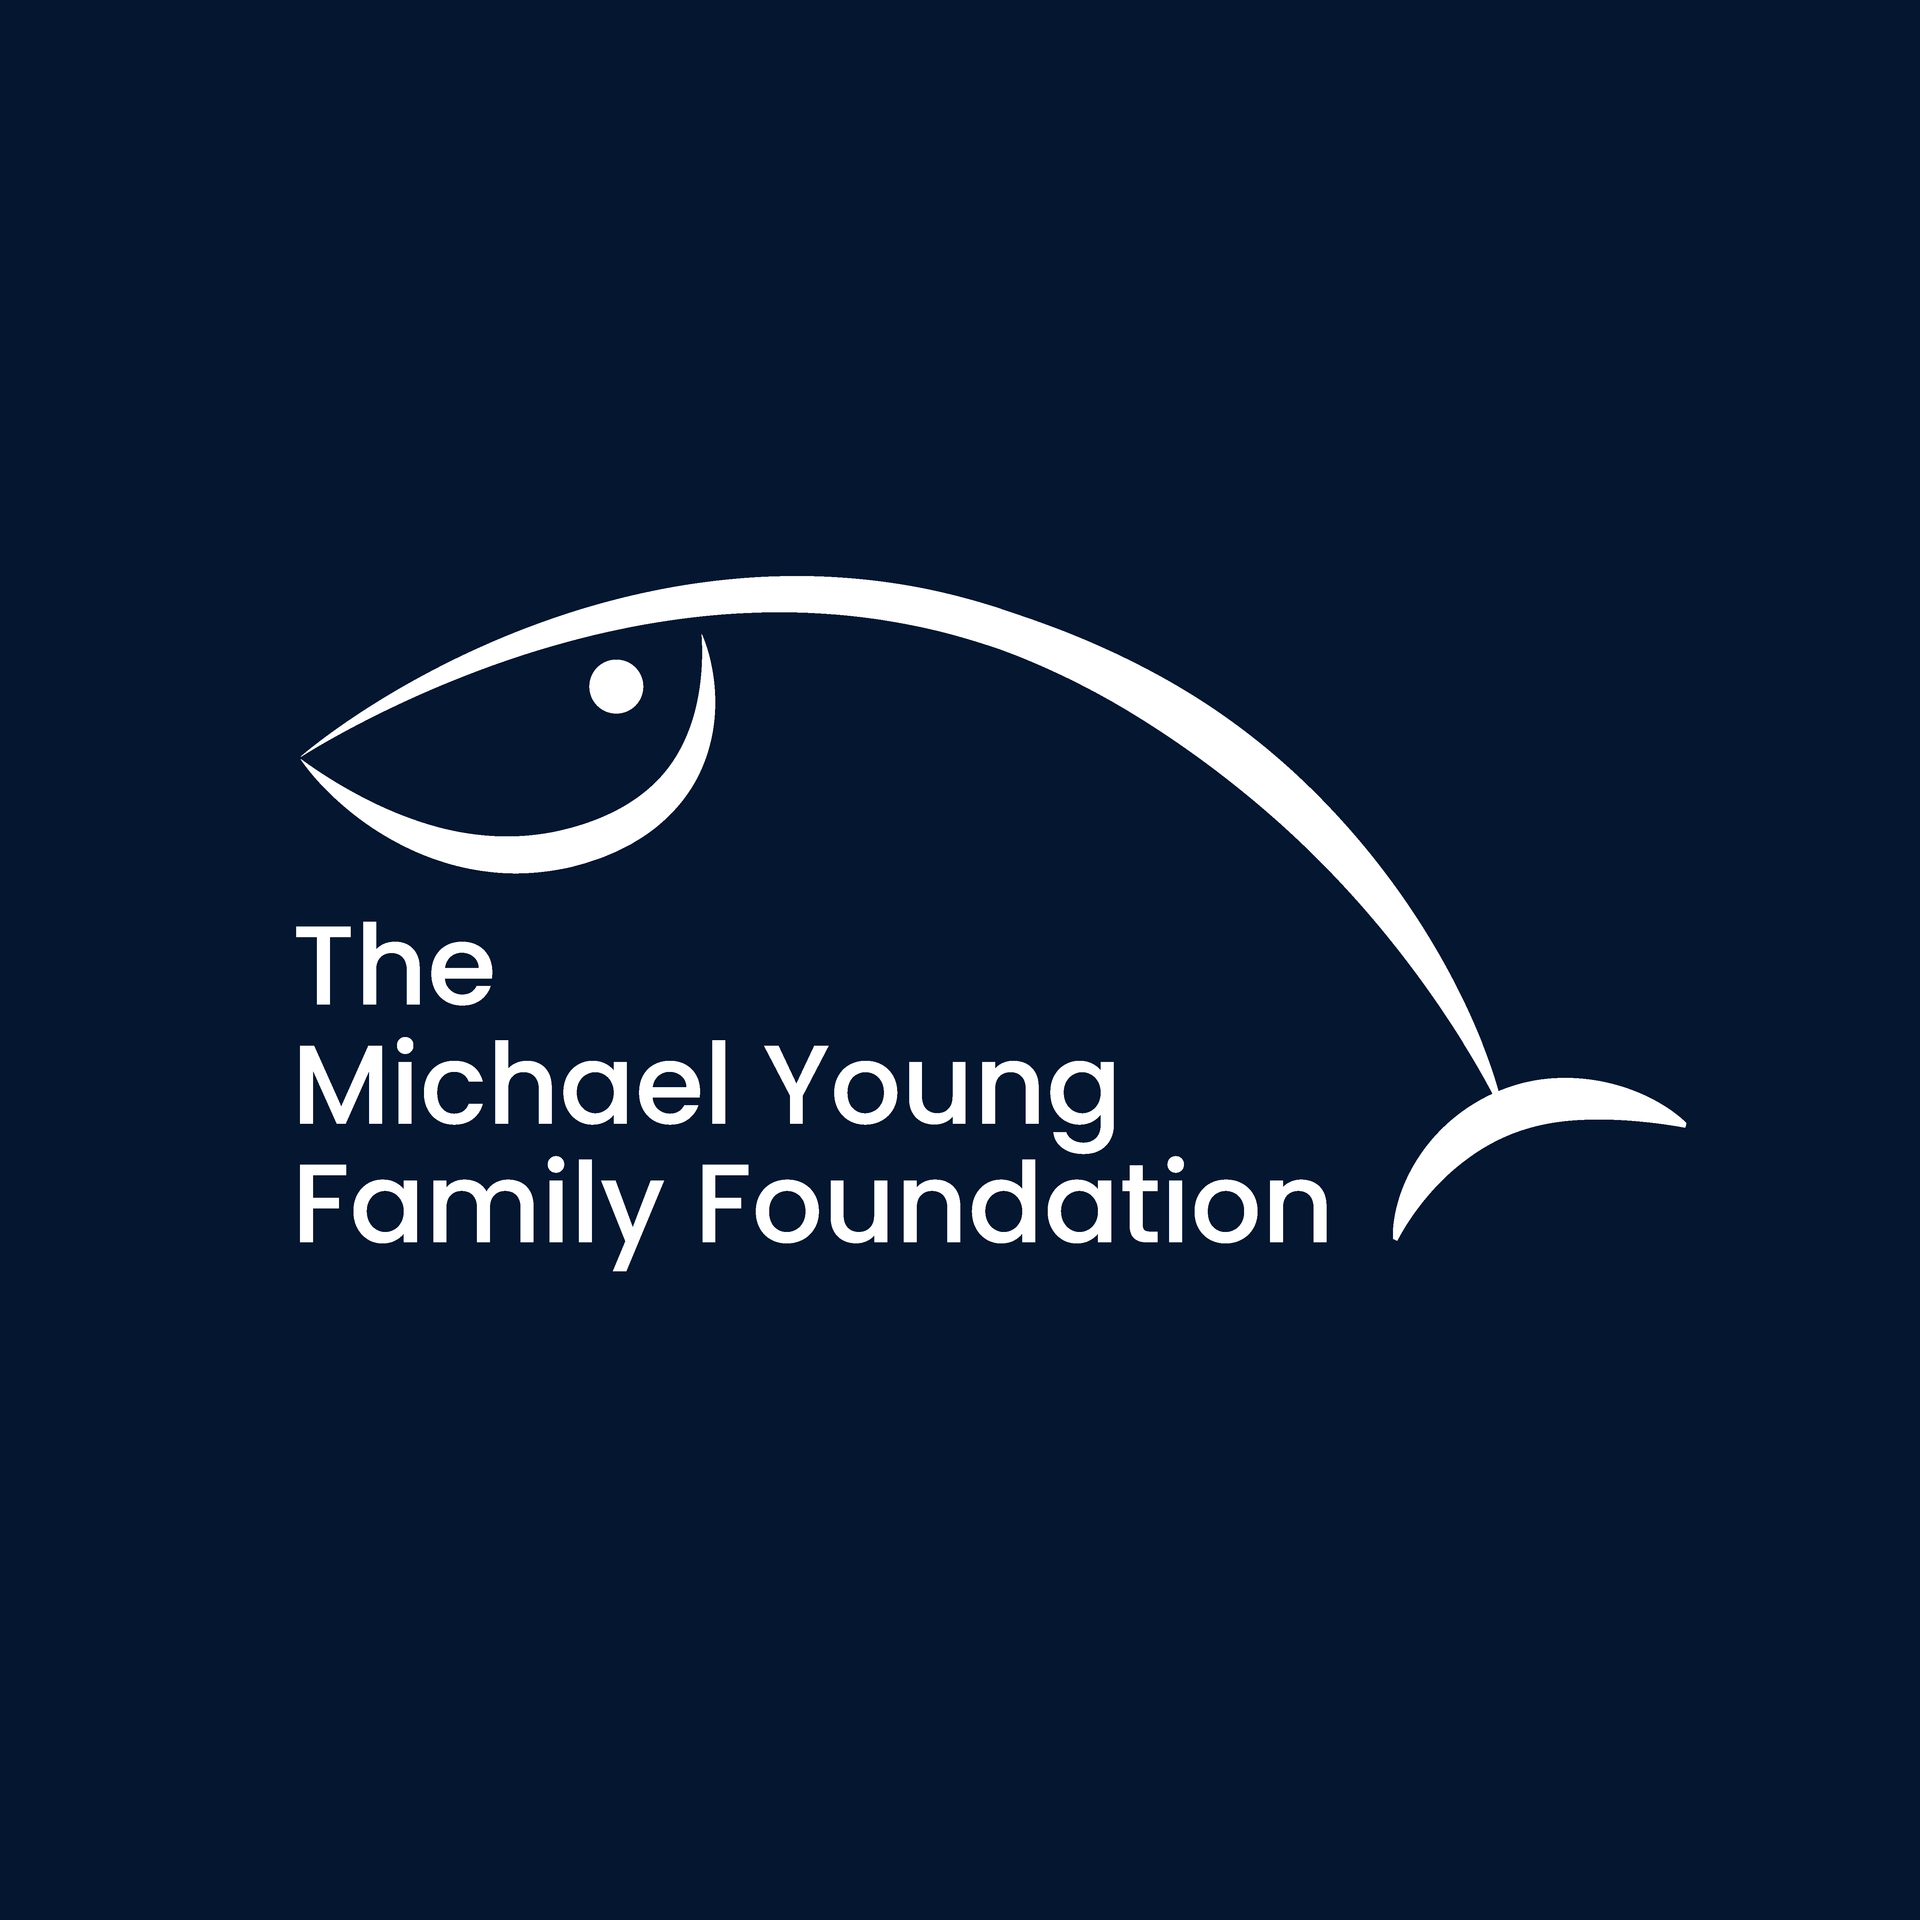 A logo for the michael young family foundation